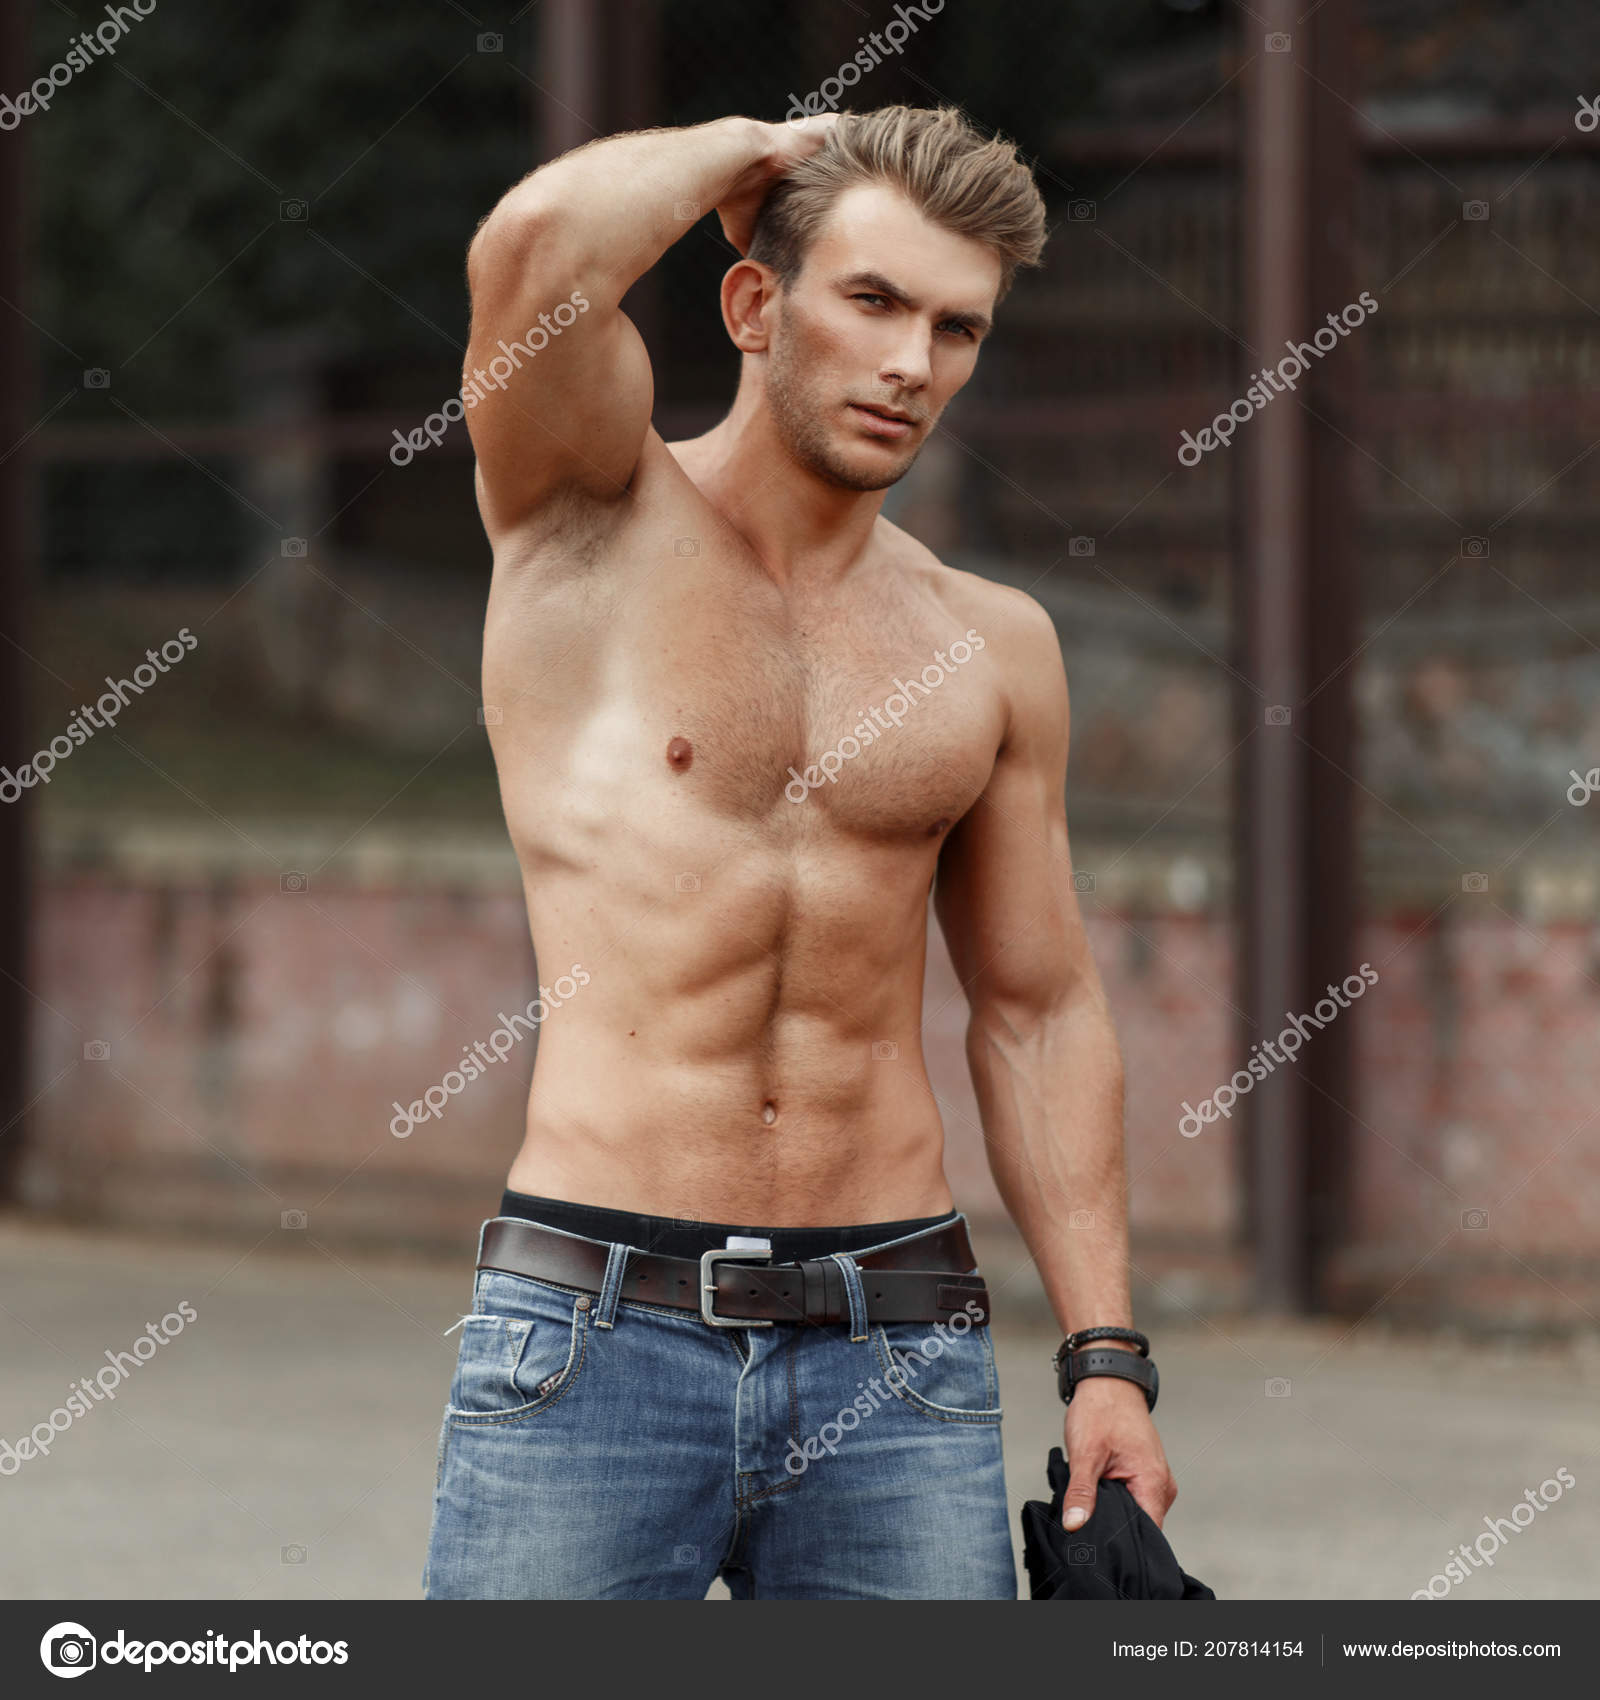 Image result for man with muscles